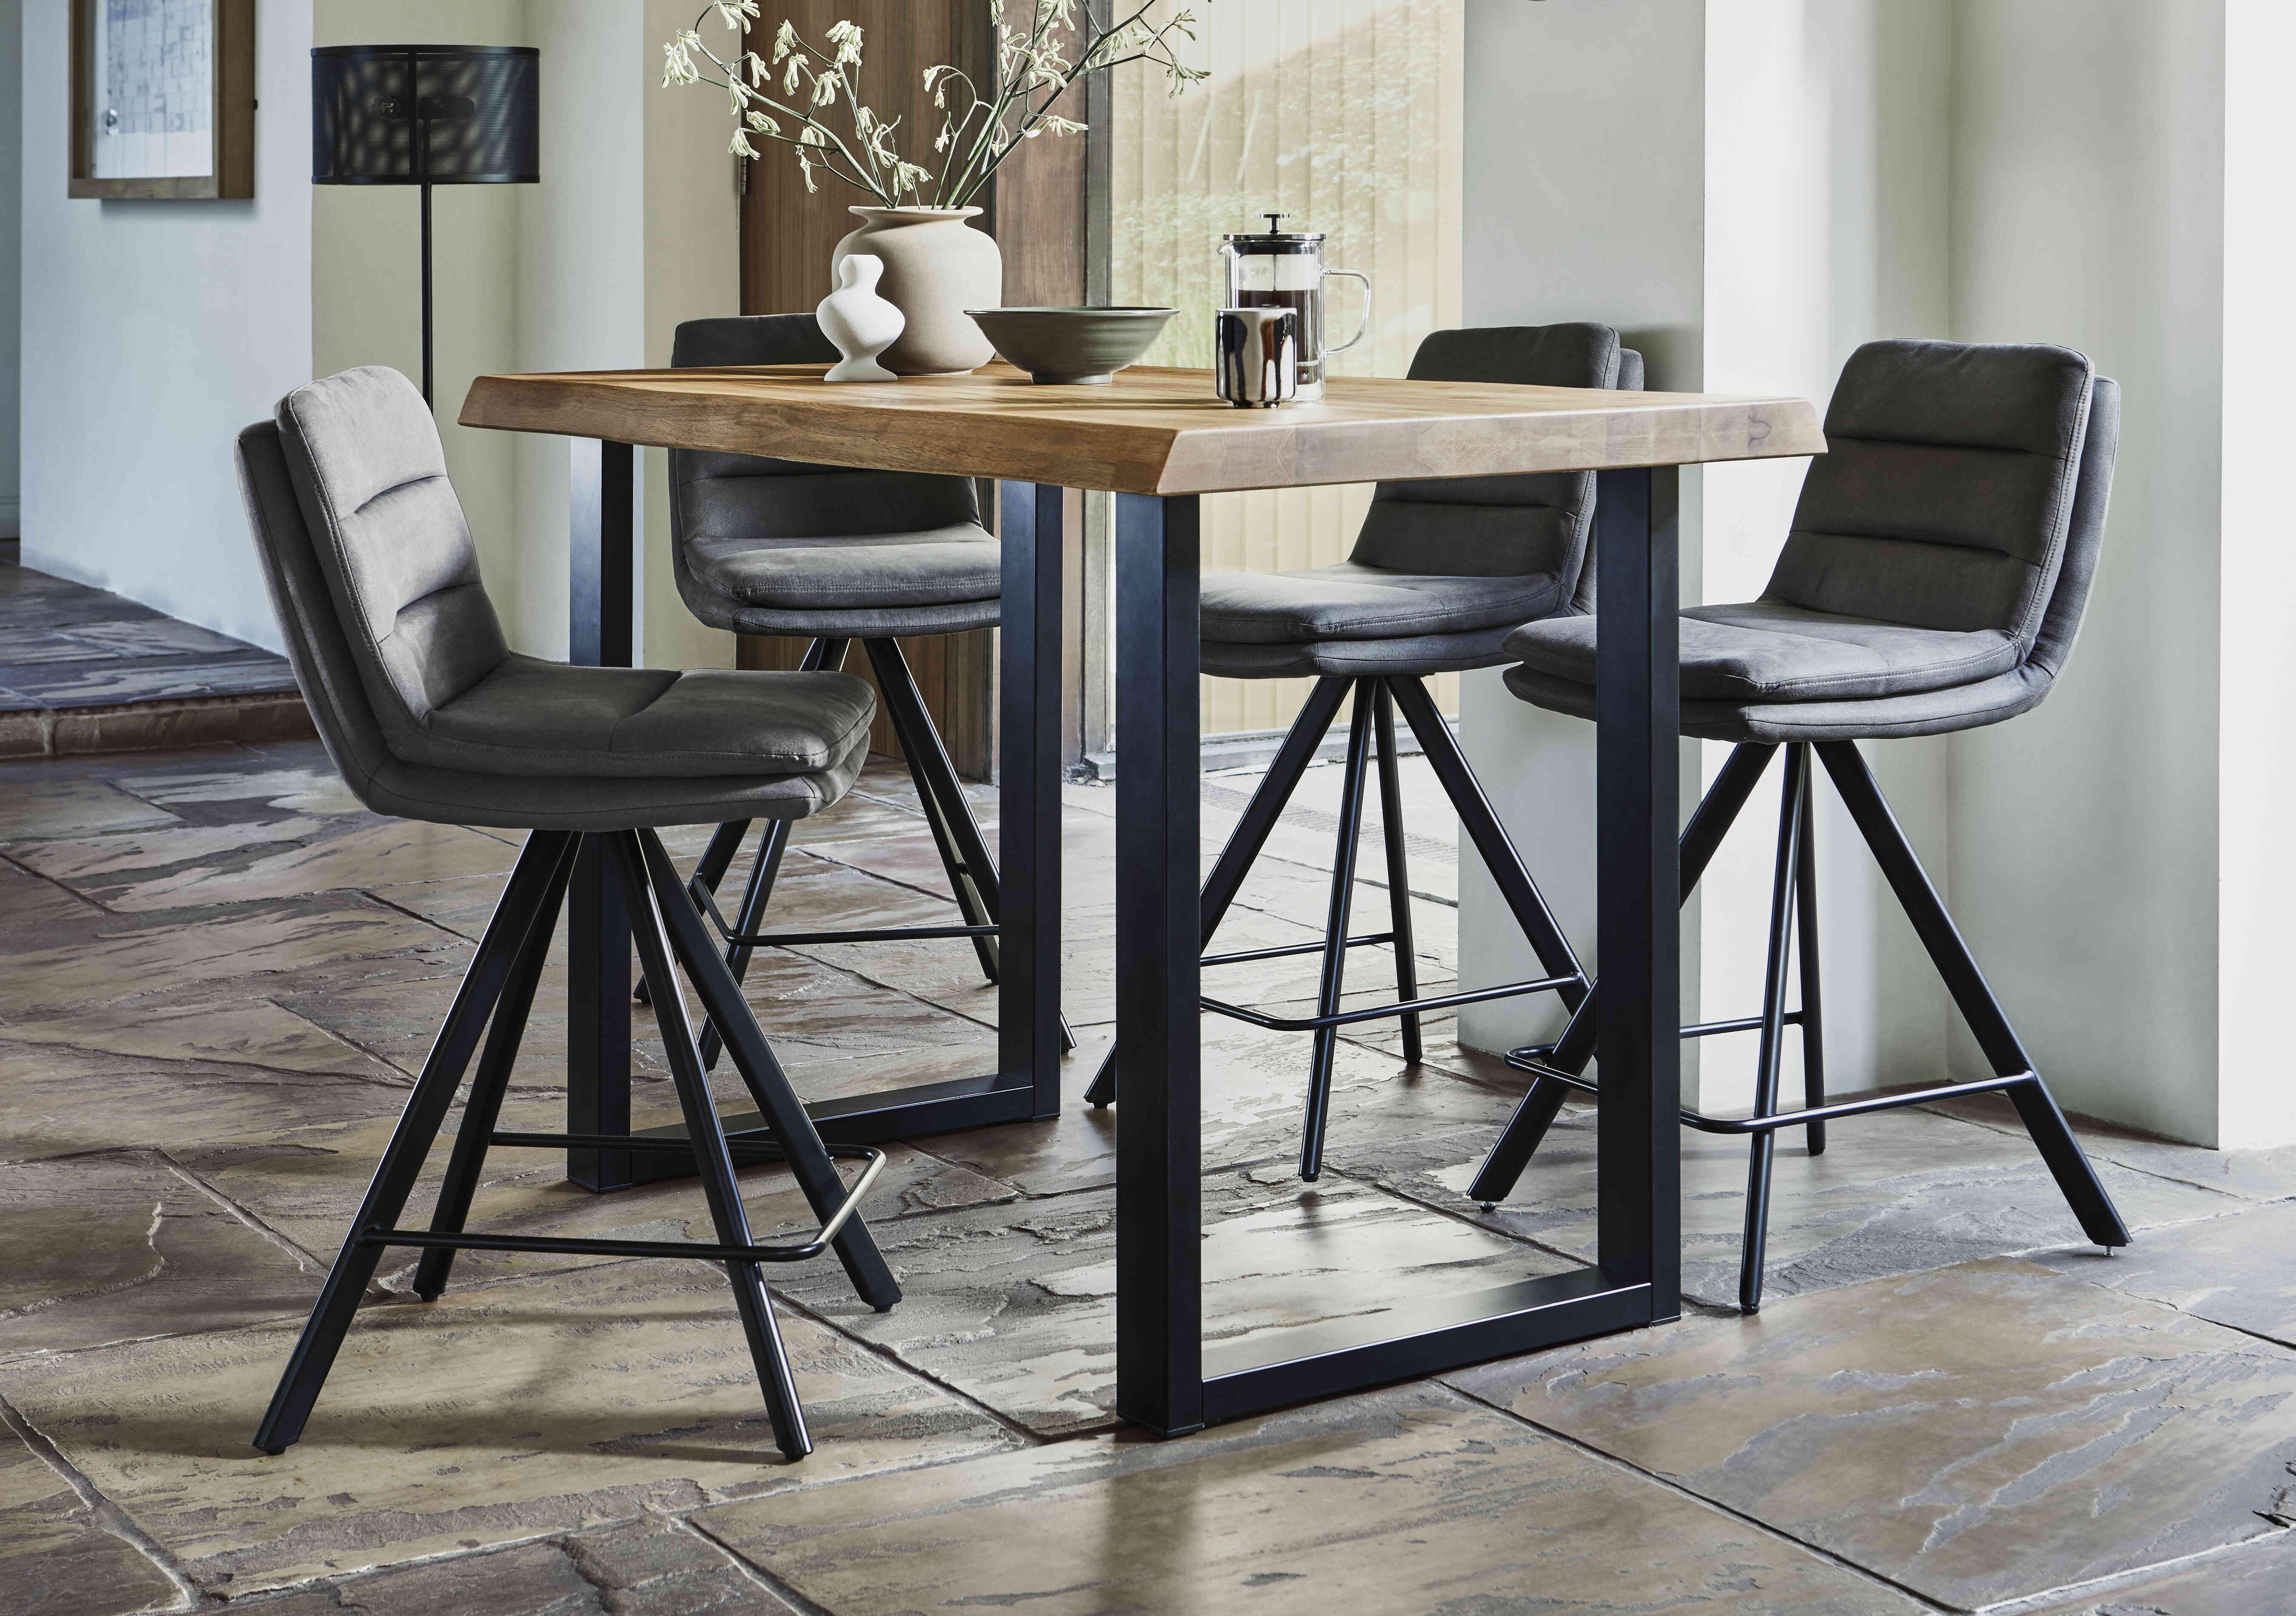 Compact Terra Raw Edge Bar Table with U-Shaped Legs and 4 Njord Bar Stools in  on Furniture Village